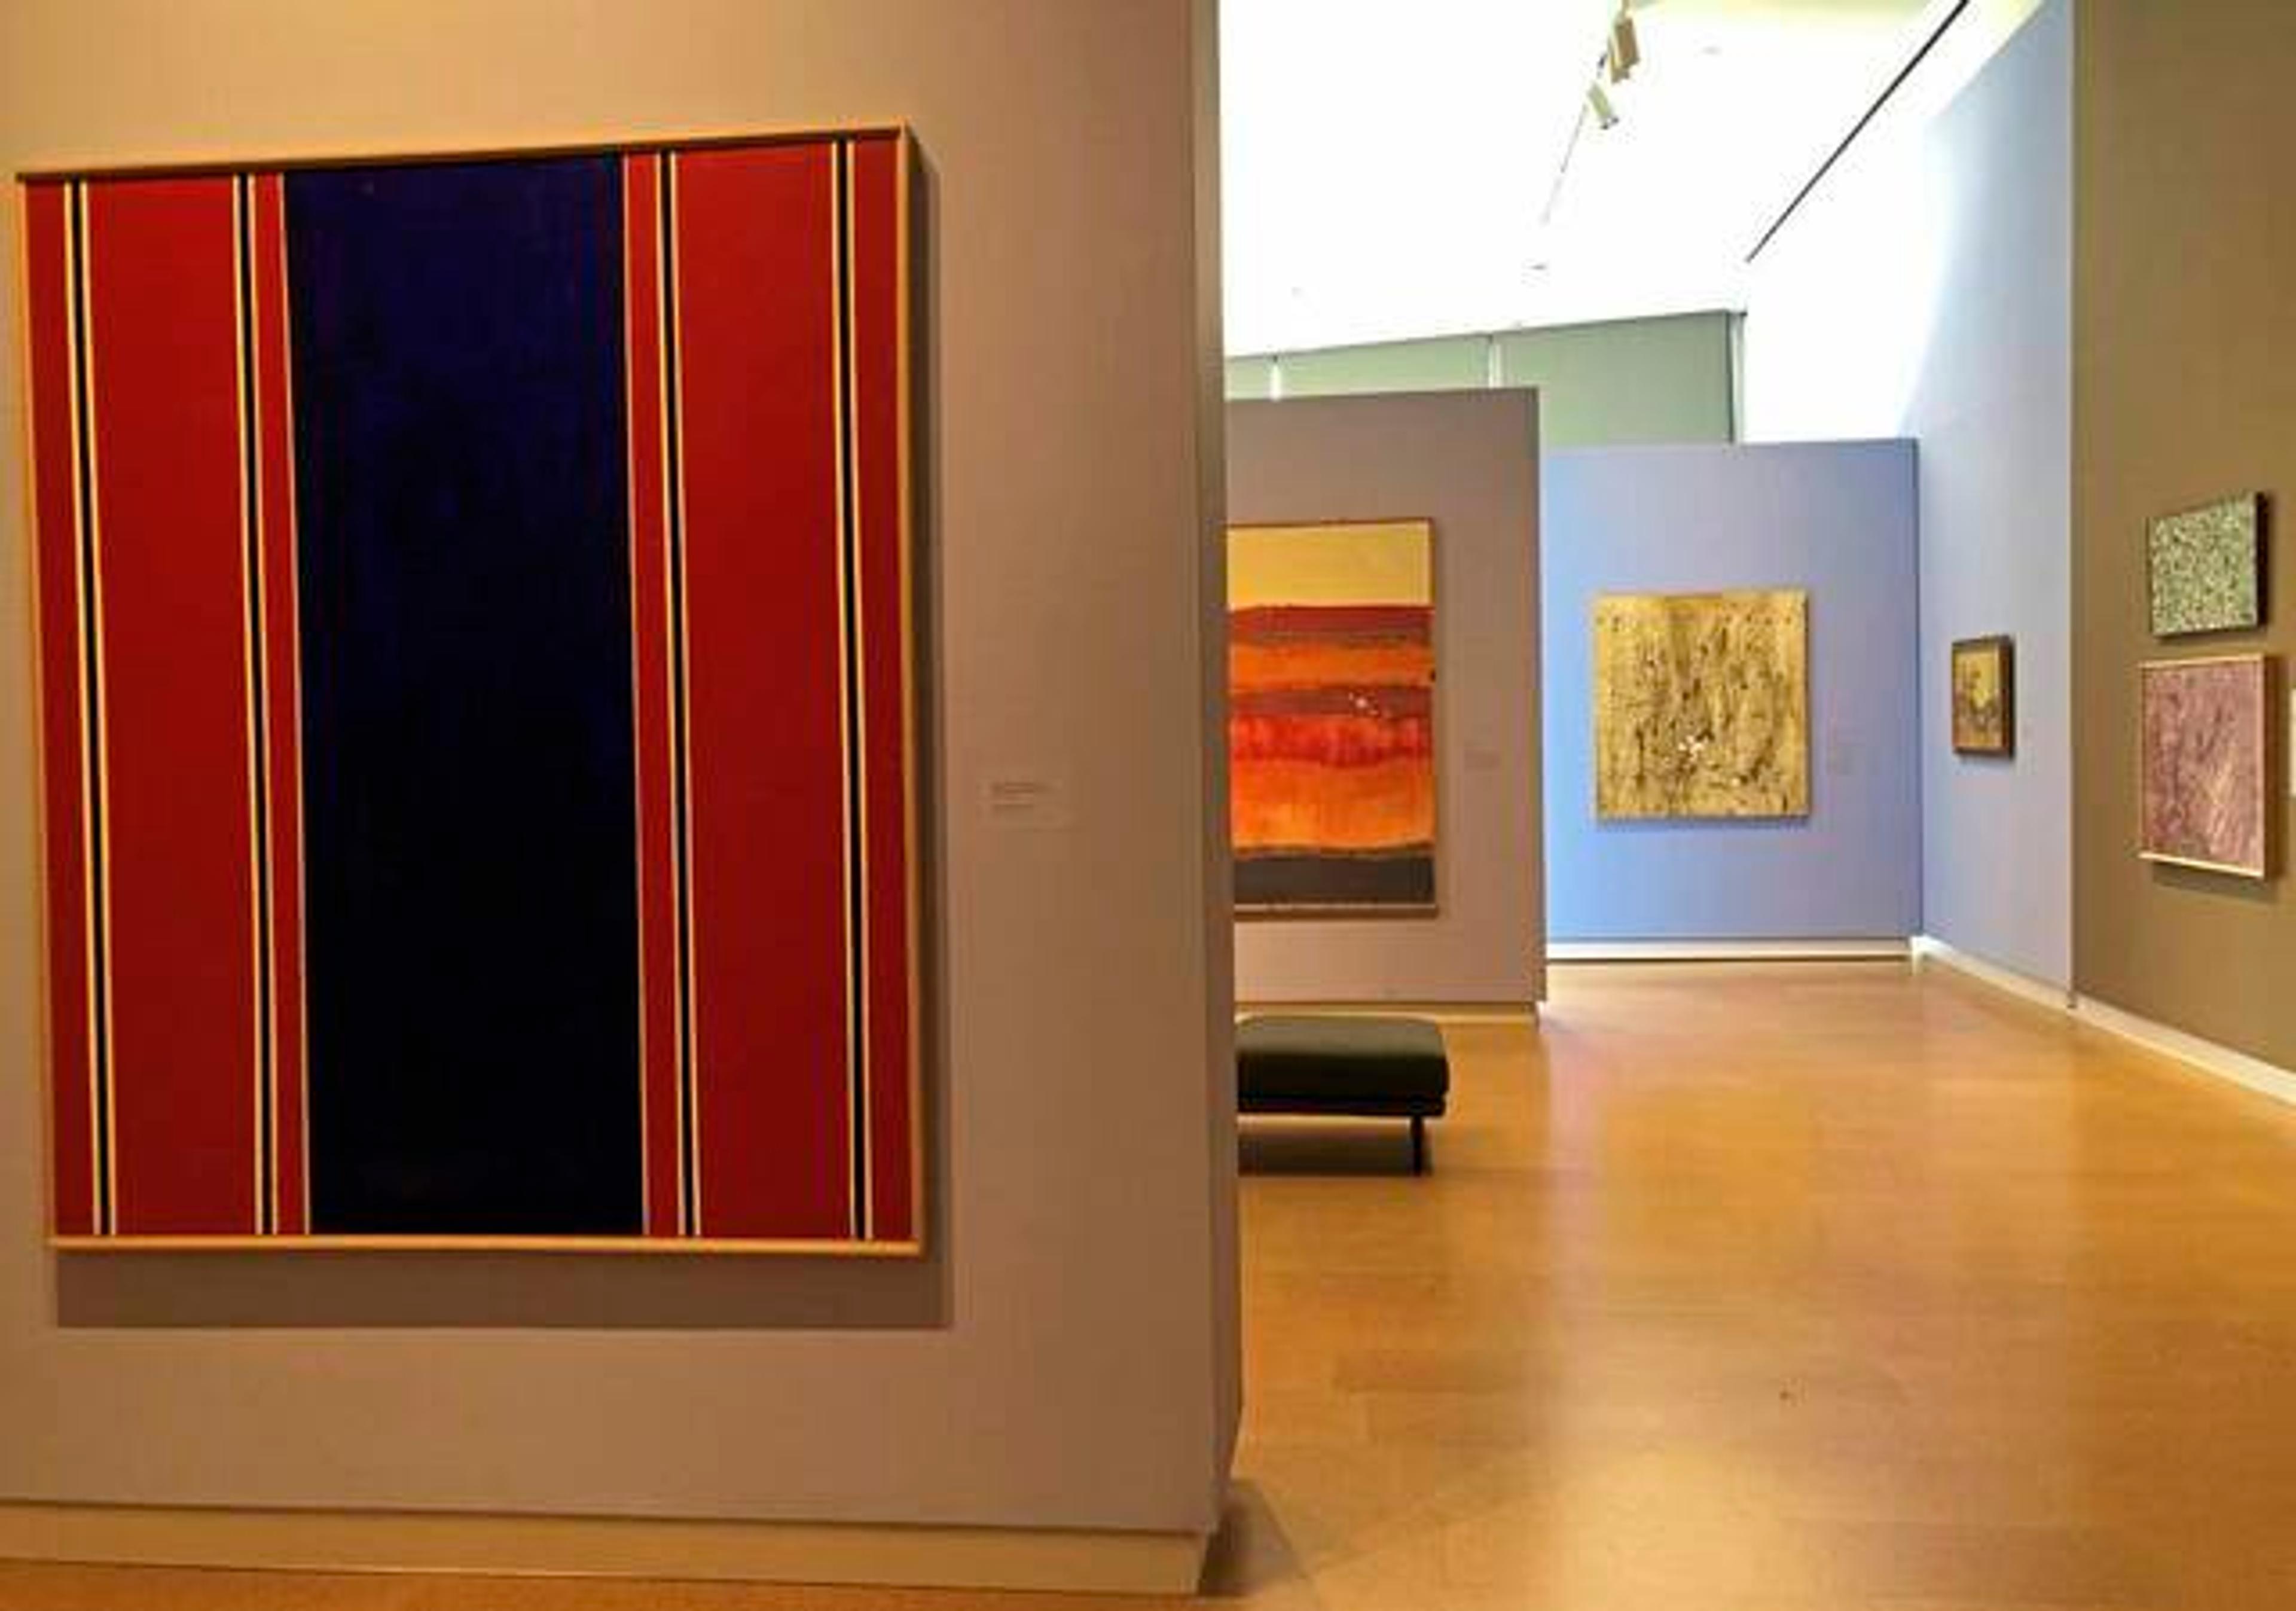 Action/Abstraction Redefined: Modern Native Art 1945-1975